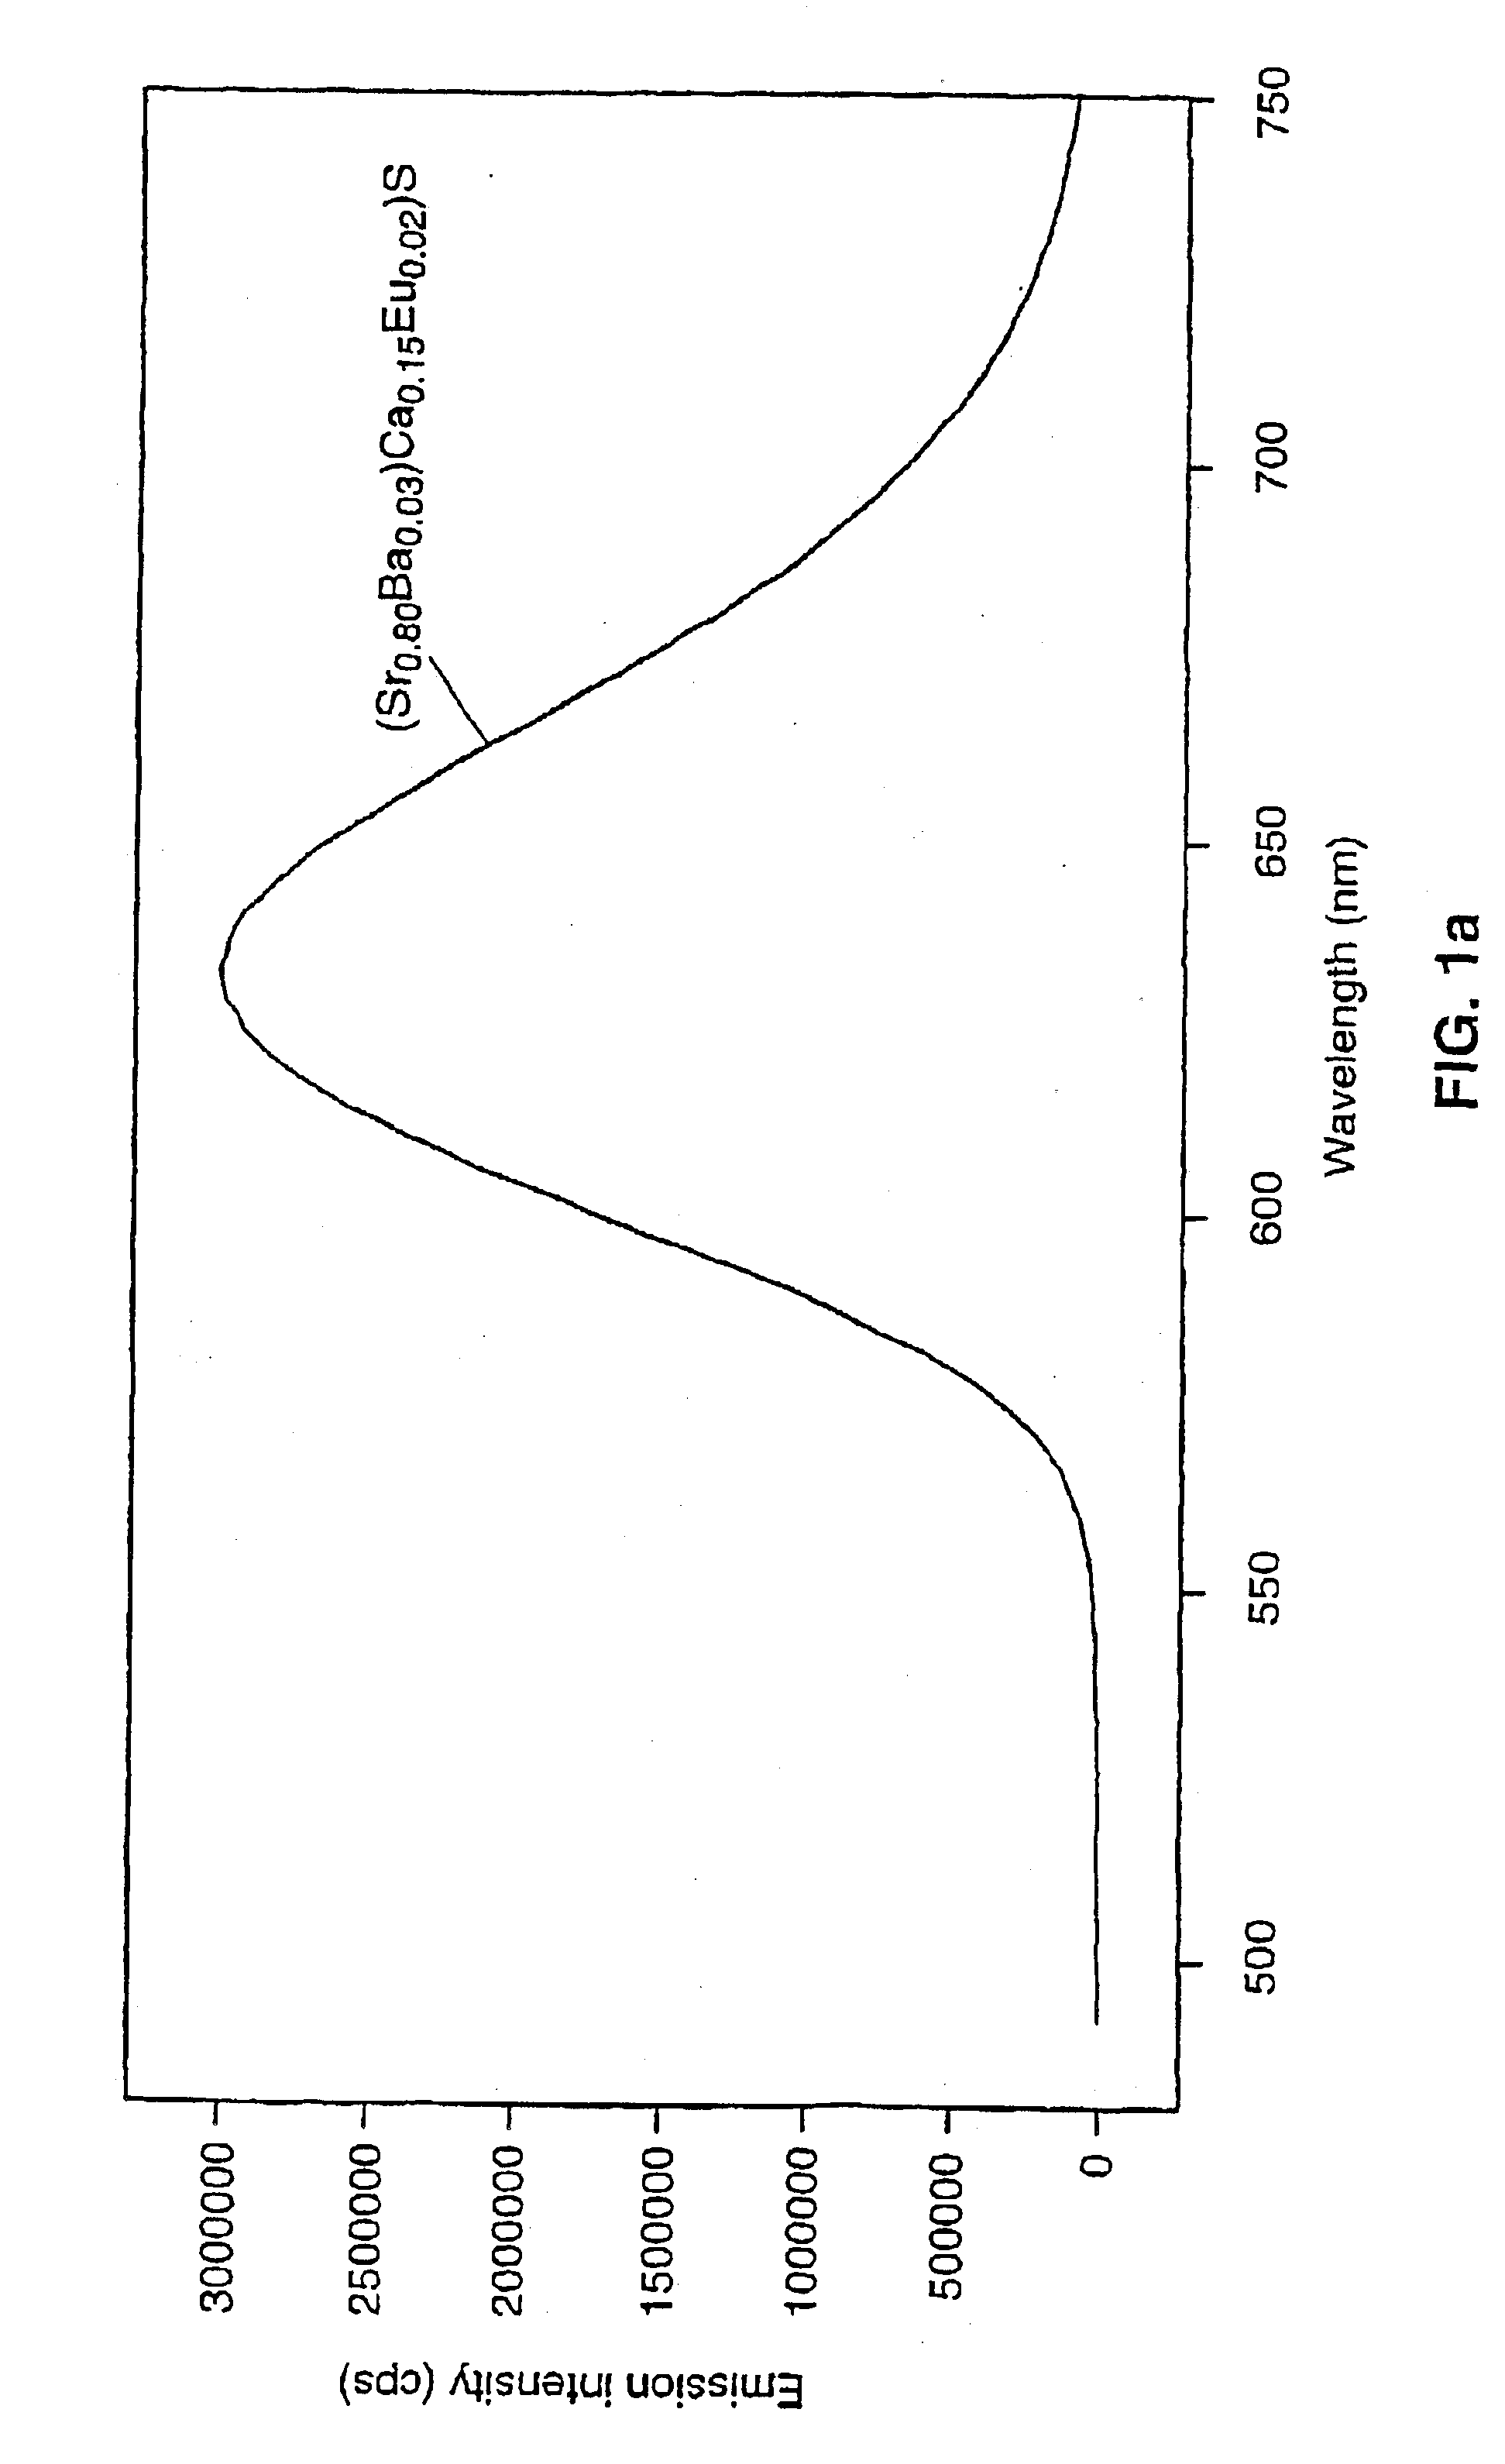 Light emitting device for generating specific colored light, including white light